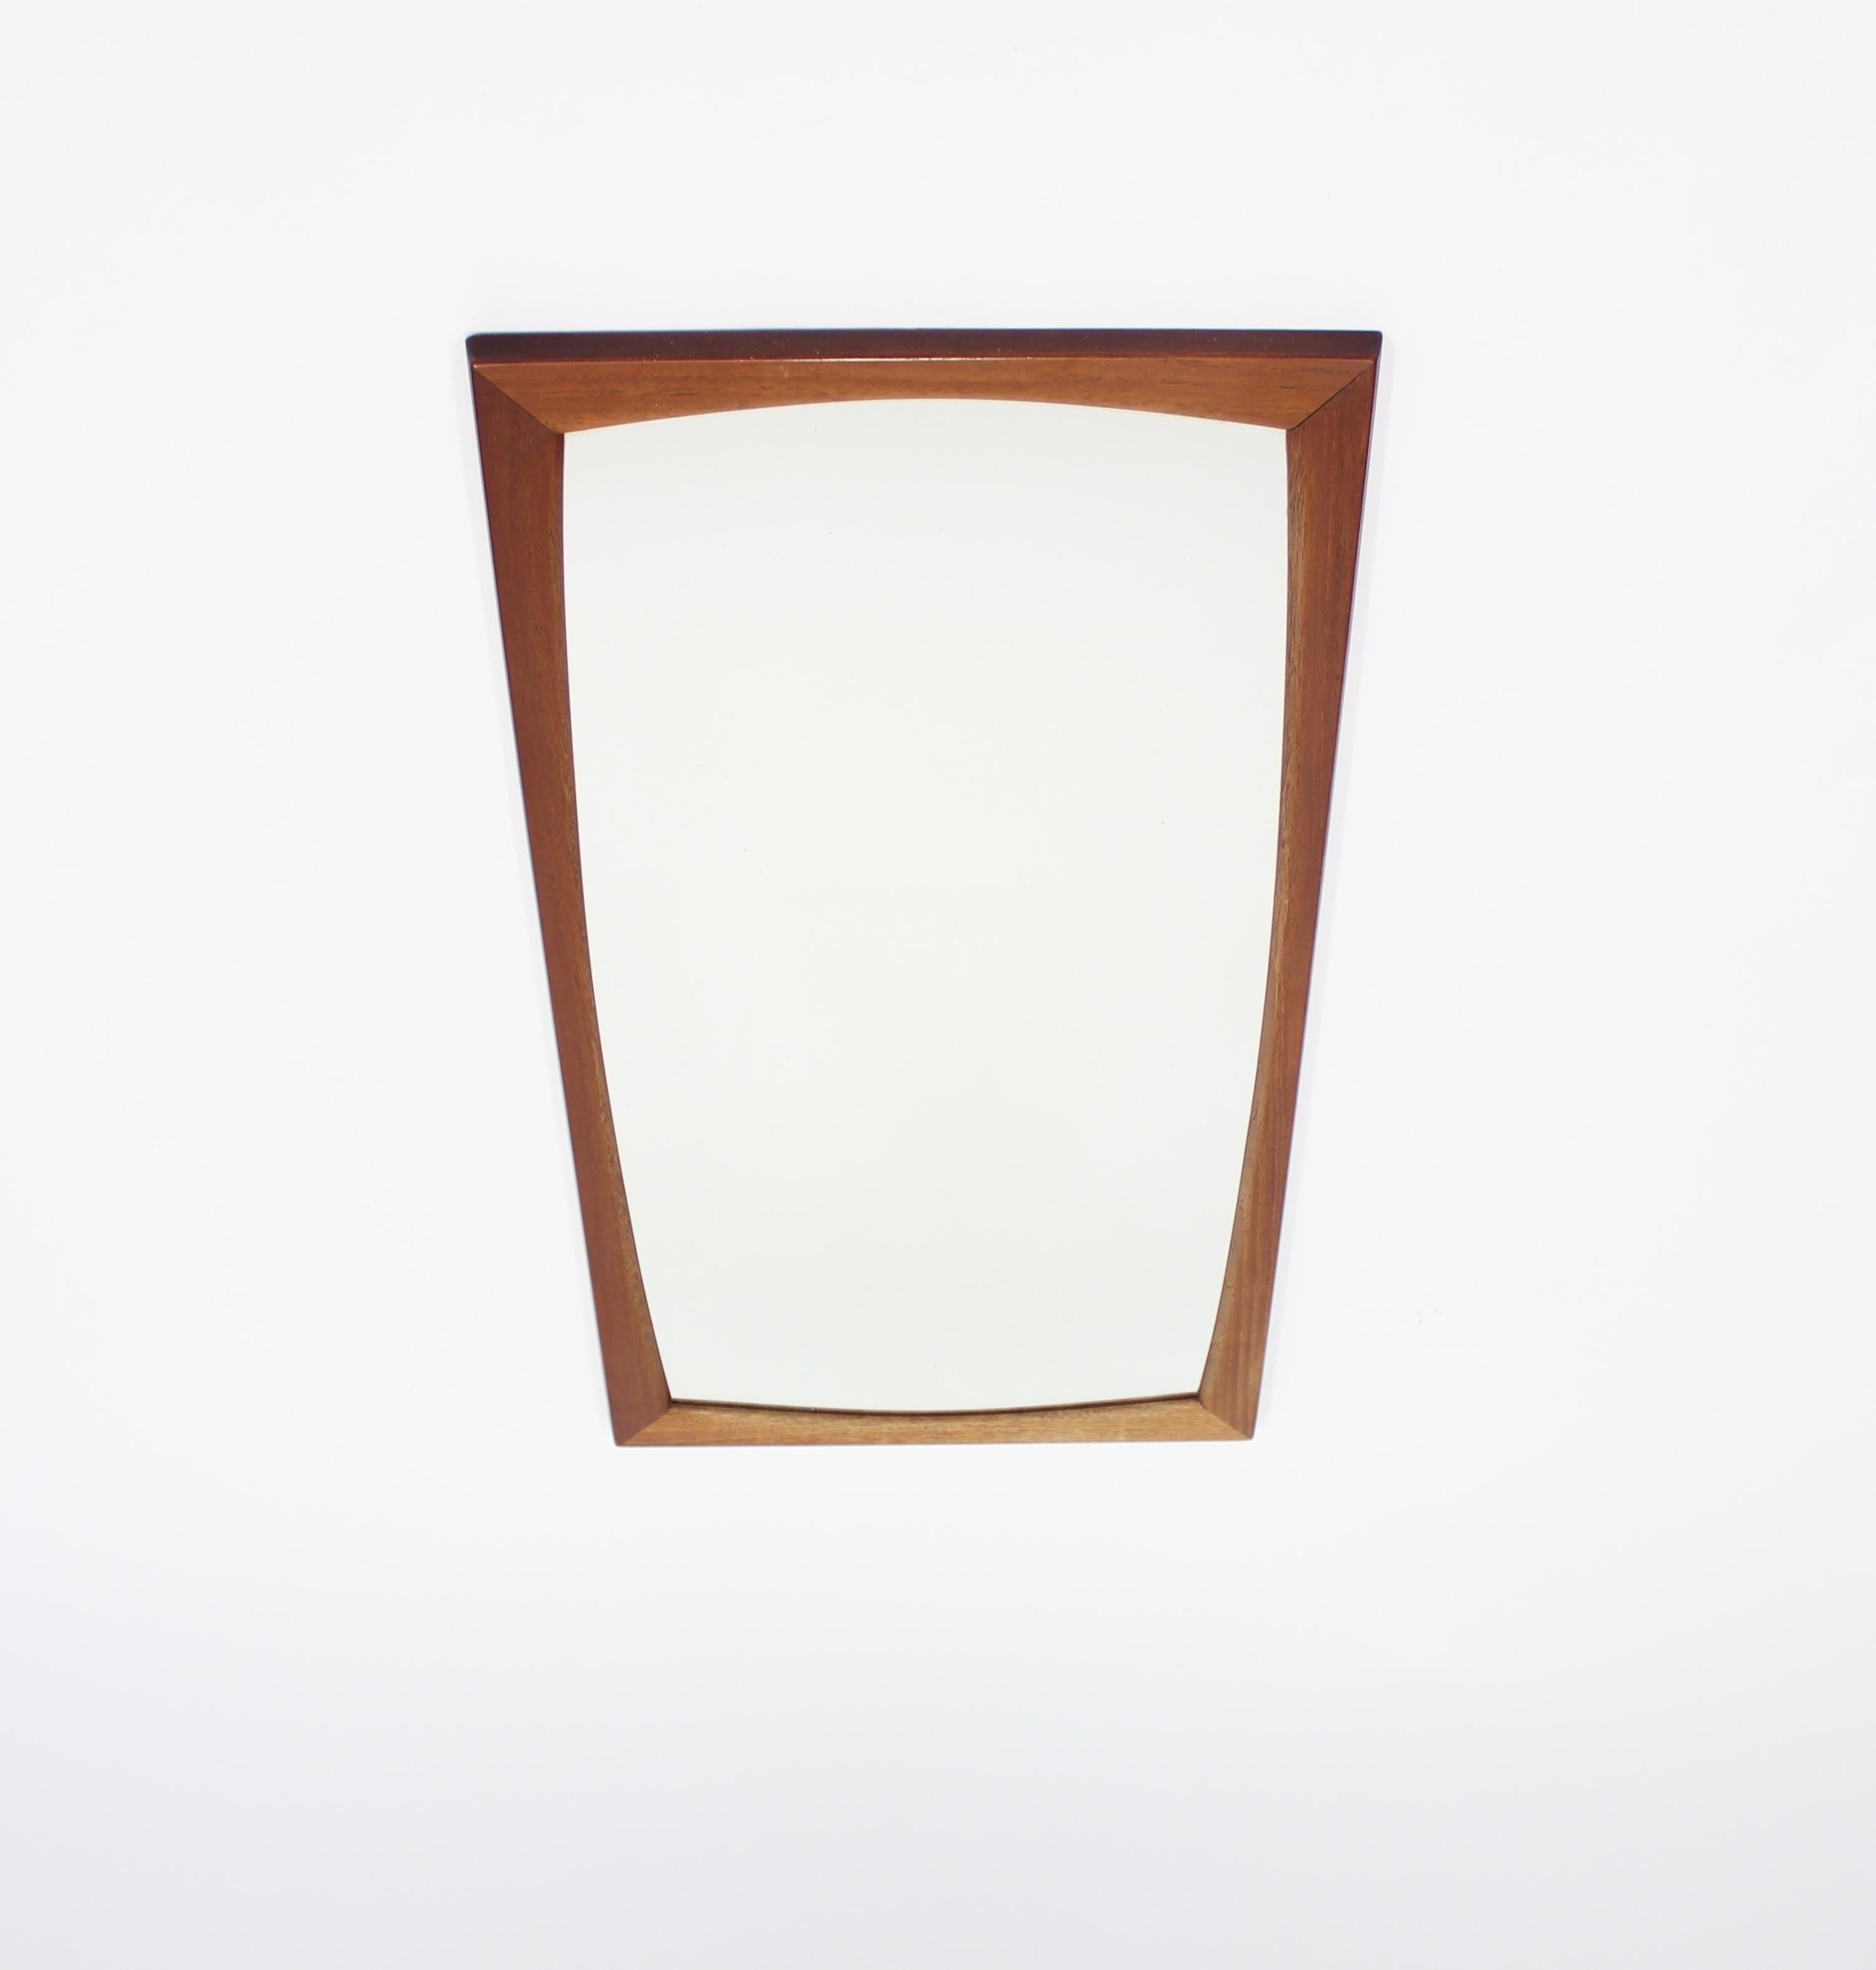 Kai Kristiansen designed mirror for renowned Danish manufacture Axel Kjersgaard. The mirror is made from solid teak with its original glass. Marked with the Danish Furniture makers control mark and by maker as well. Very good condition.